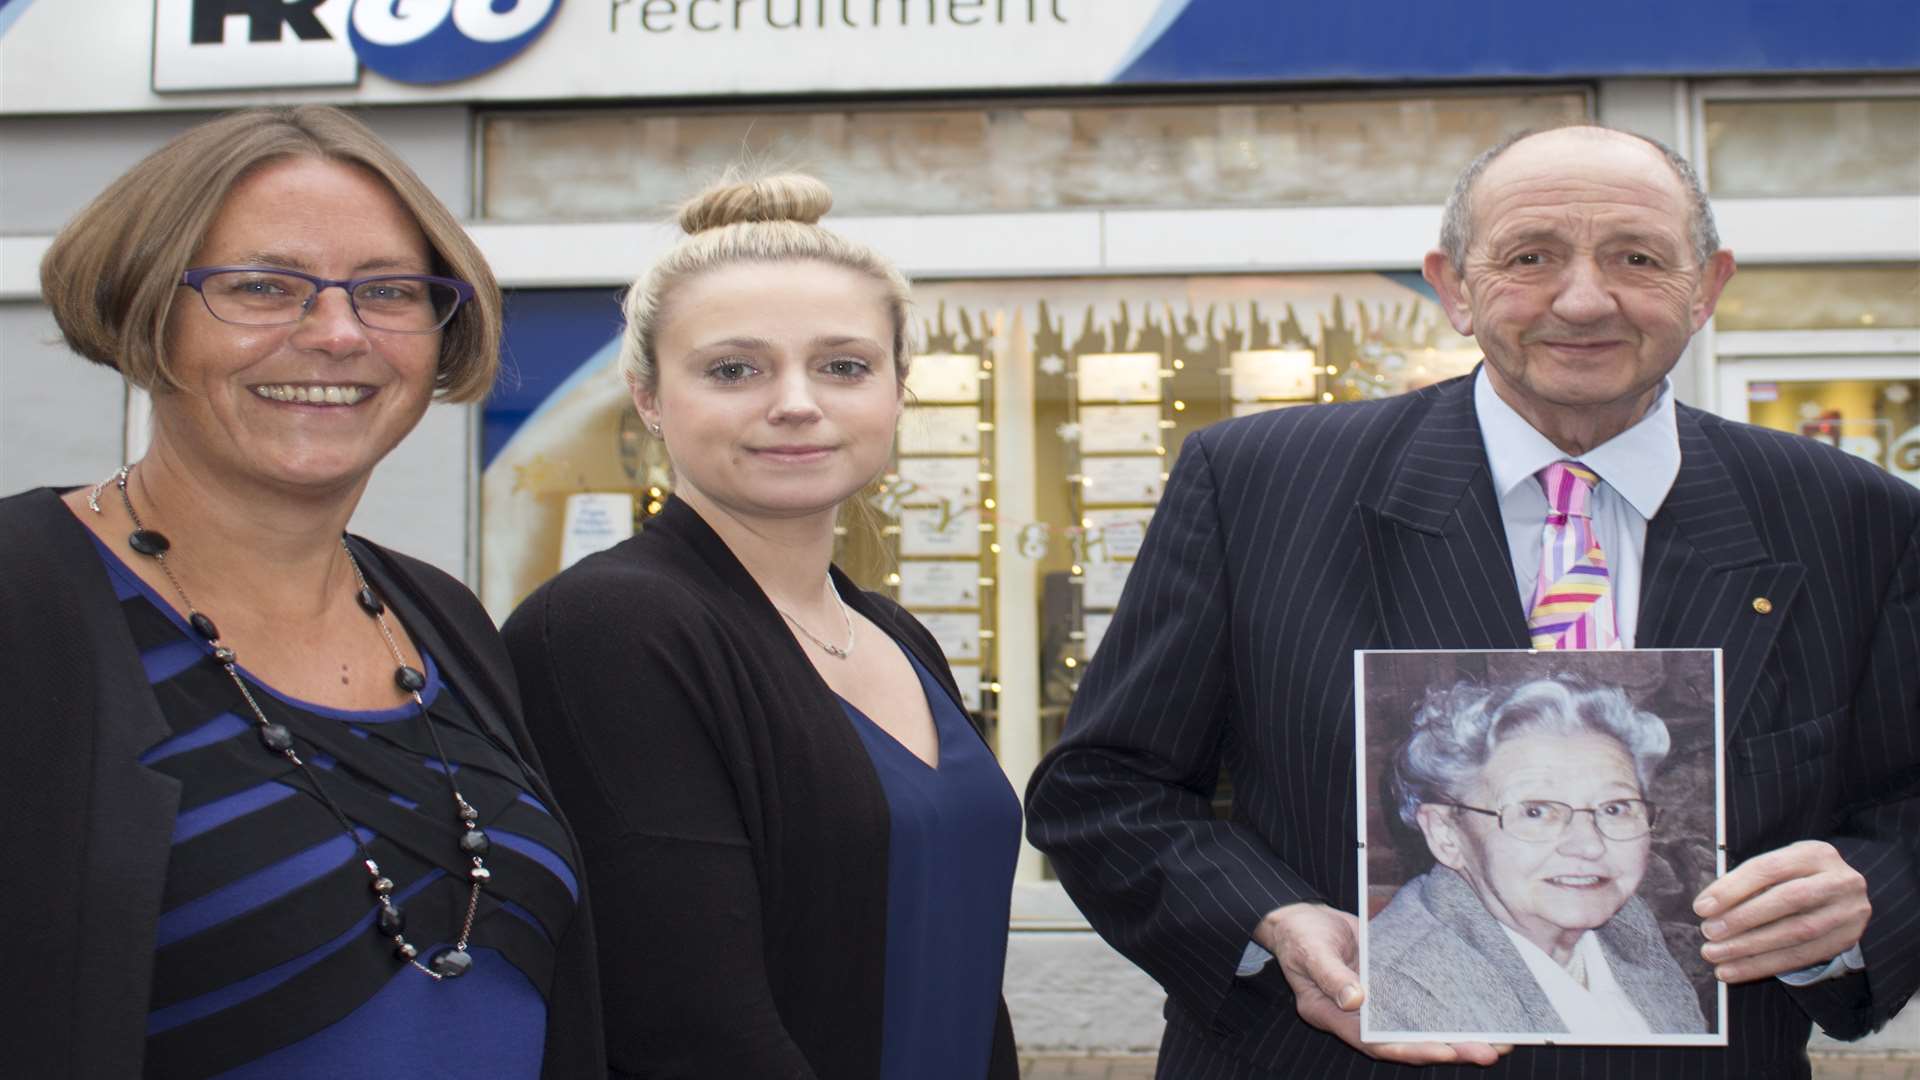 Chairman Jack Parkinson with a photo of Betty, his late mother and company founder, outside the branch in Dartford where the business began, with branch manager Lucy Andrew, left, and commercial consultant Samantha Foster